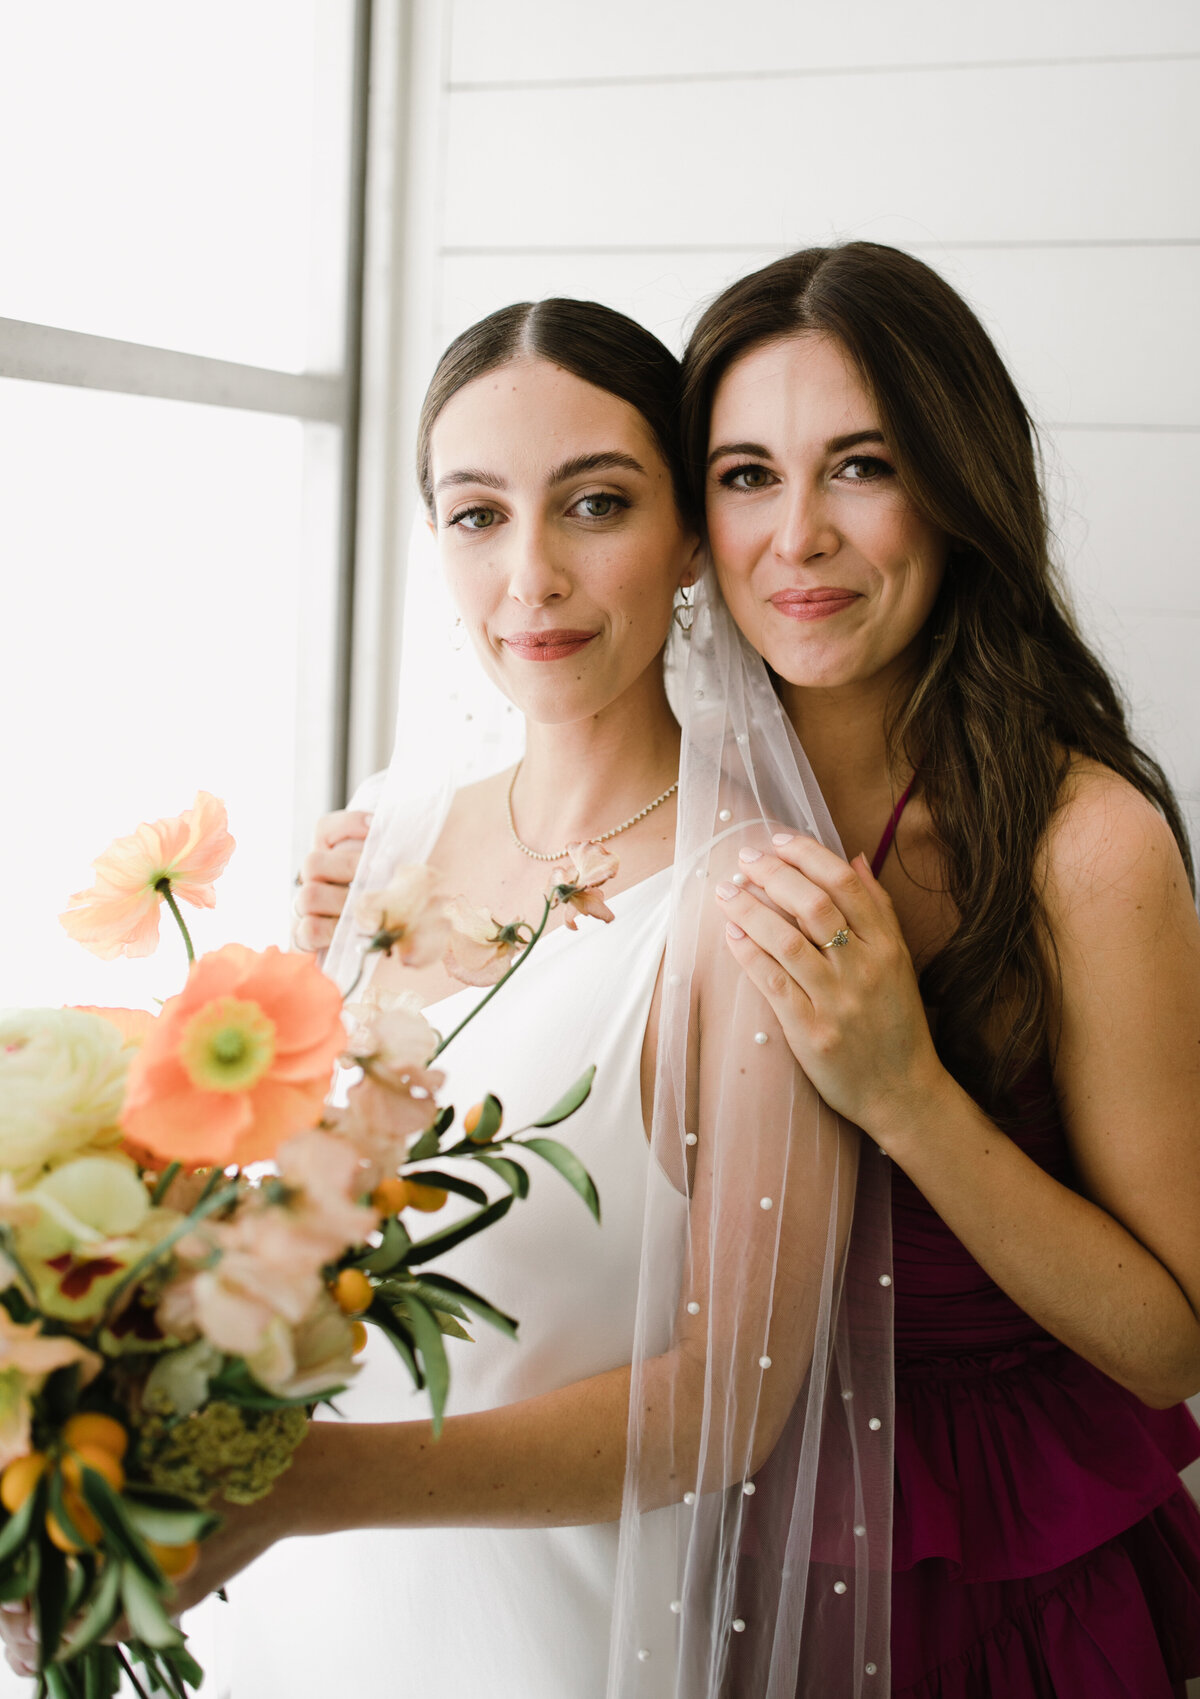 Bride with wearing pearl veil and peach florals with woman in purple dress